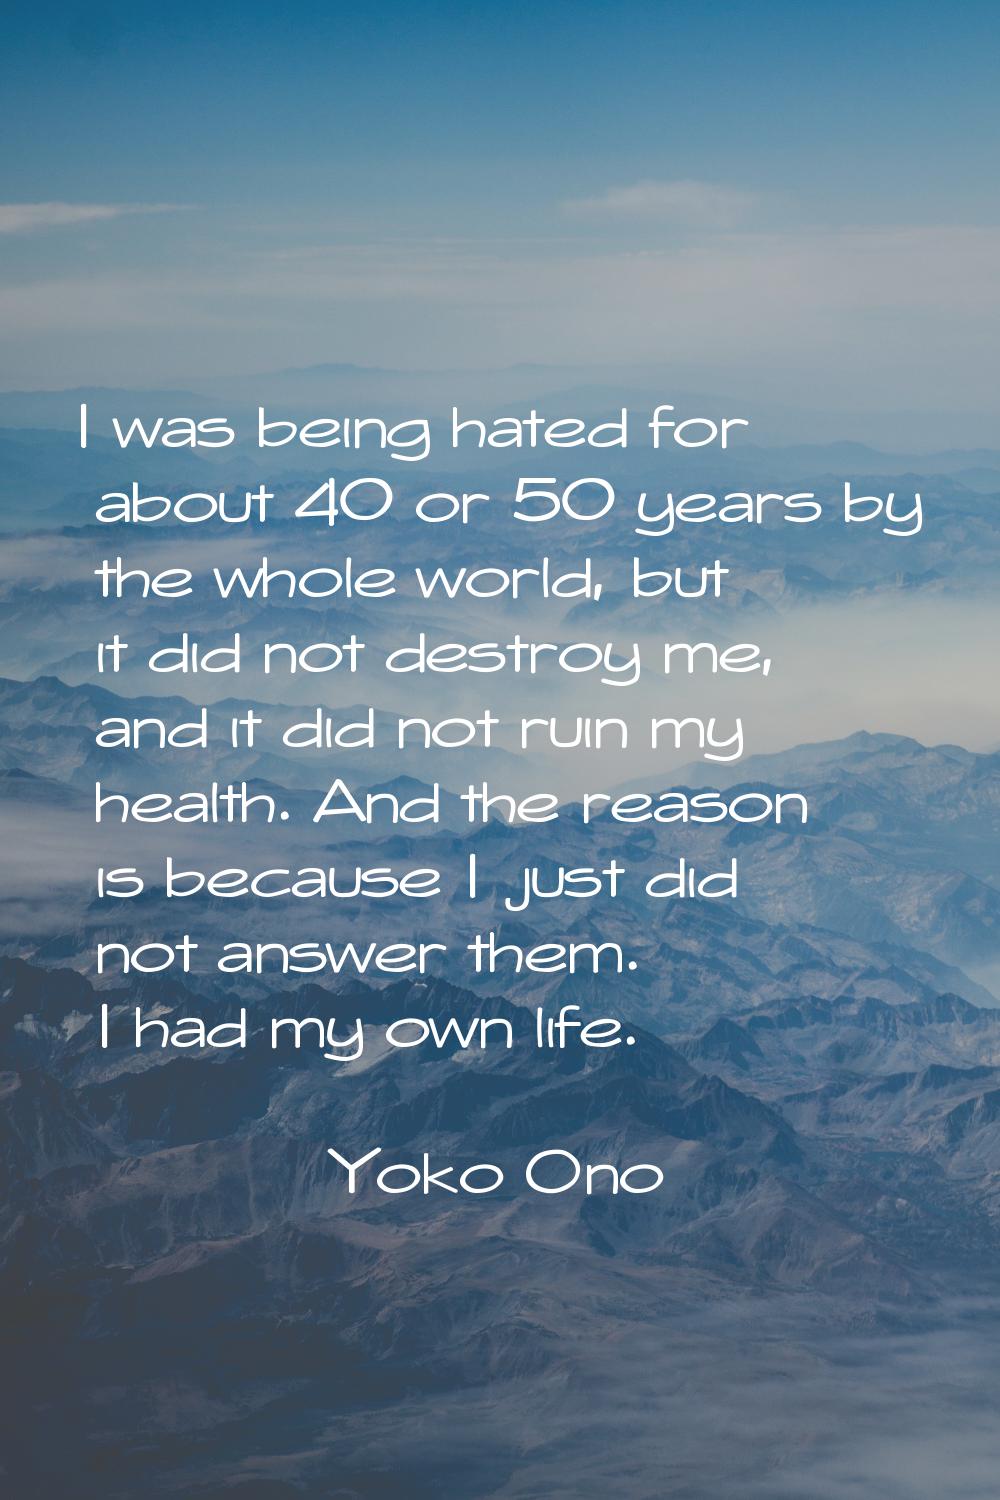 I was being hated for about 40 or 50 years by the whole world, but it did not destroy me, and it di